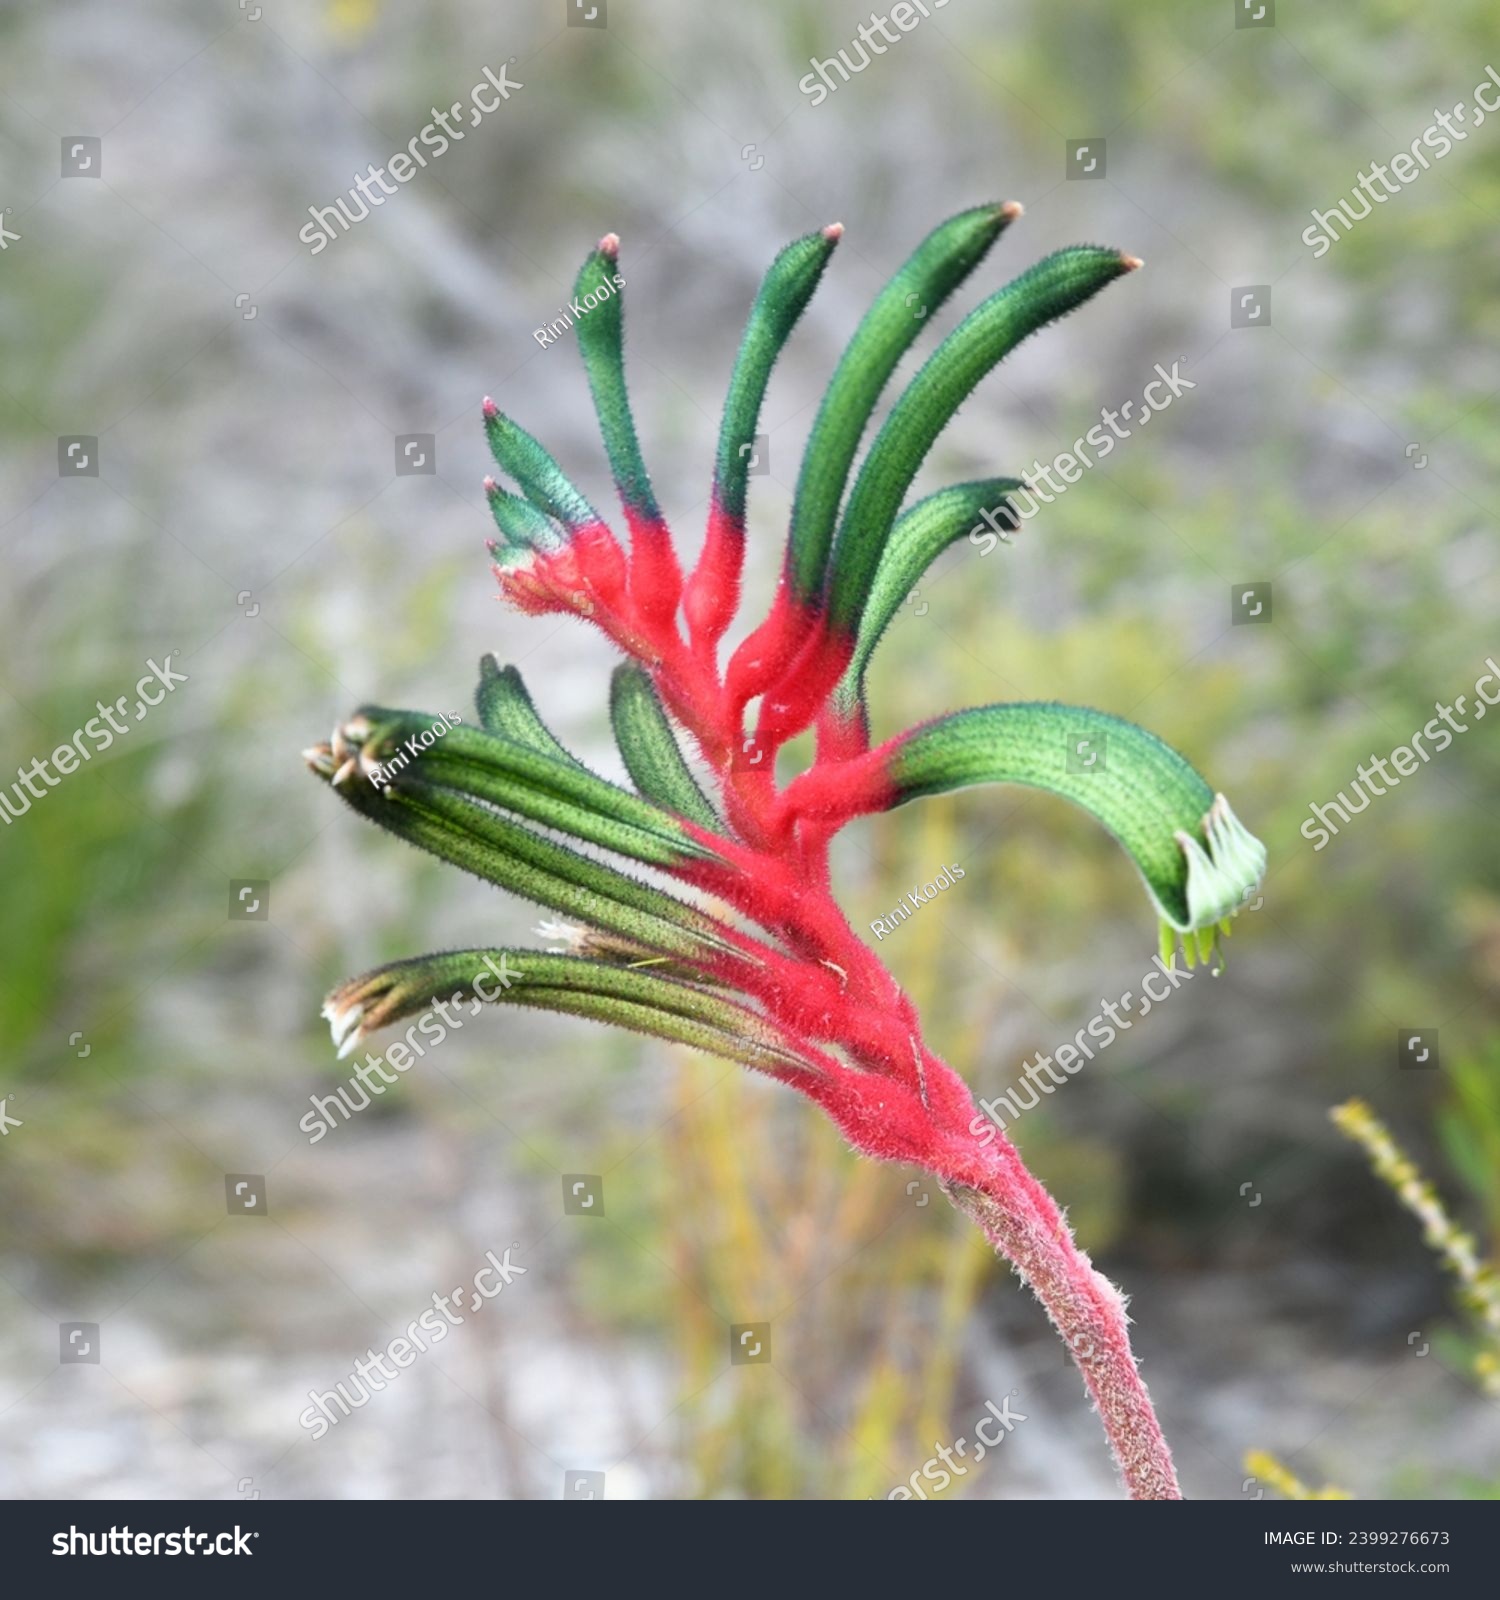 Anigozanthos manglesii, commonly known as the red-and-green kangaroo paw or Mangles' kangaroo paw, is a plant species endemic to Western Australia, and the floral emblem of that state #2399276673